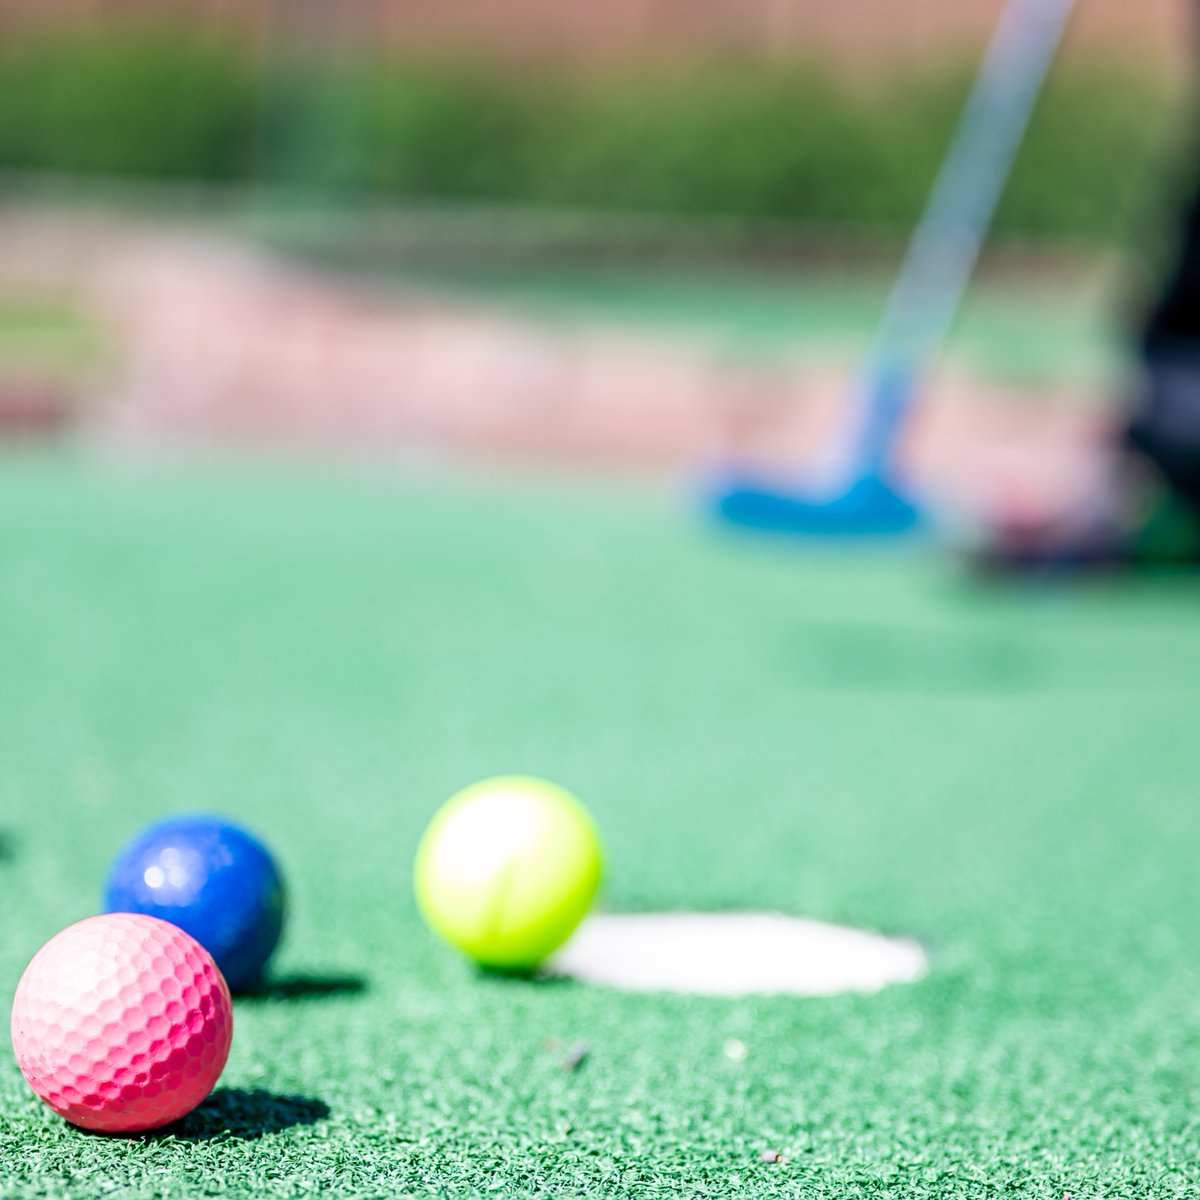 Is Miniature Golf your cup of tee? ⛳ We’re counting down the days until the opening of Pier Park, with the grand opening of our new 9-hole miniature golf course! 
#NavyPier #chicago #minigolf